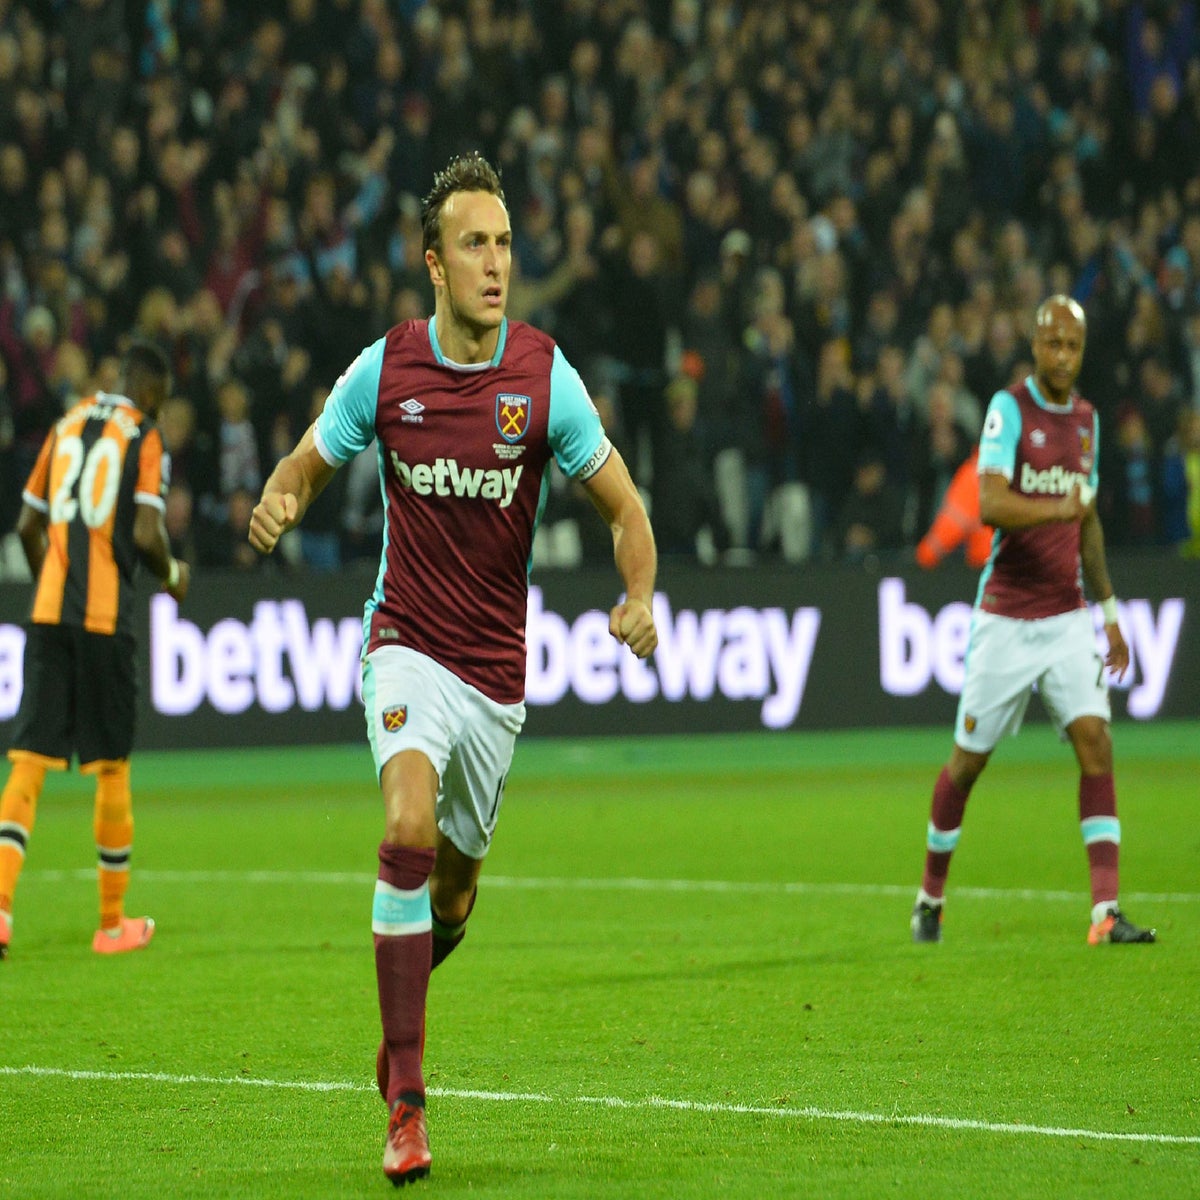 EXCLUSIVE: Go down with my Hammers? Never again says West Ham's Mark Noble, Football, Sport